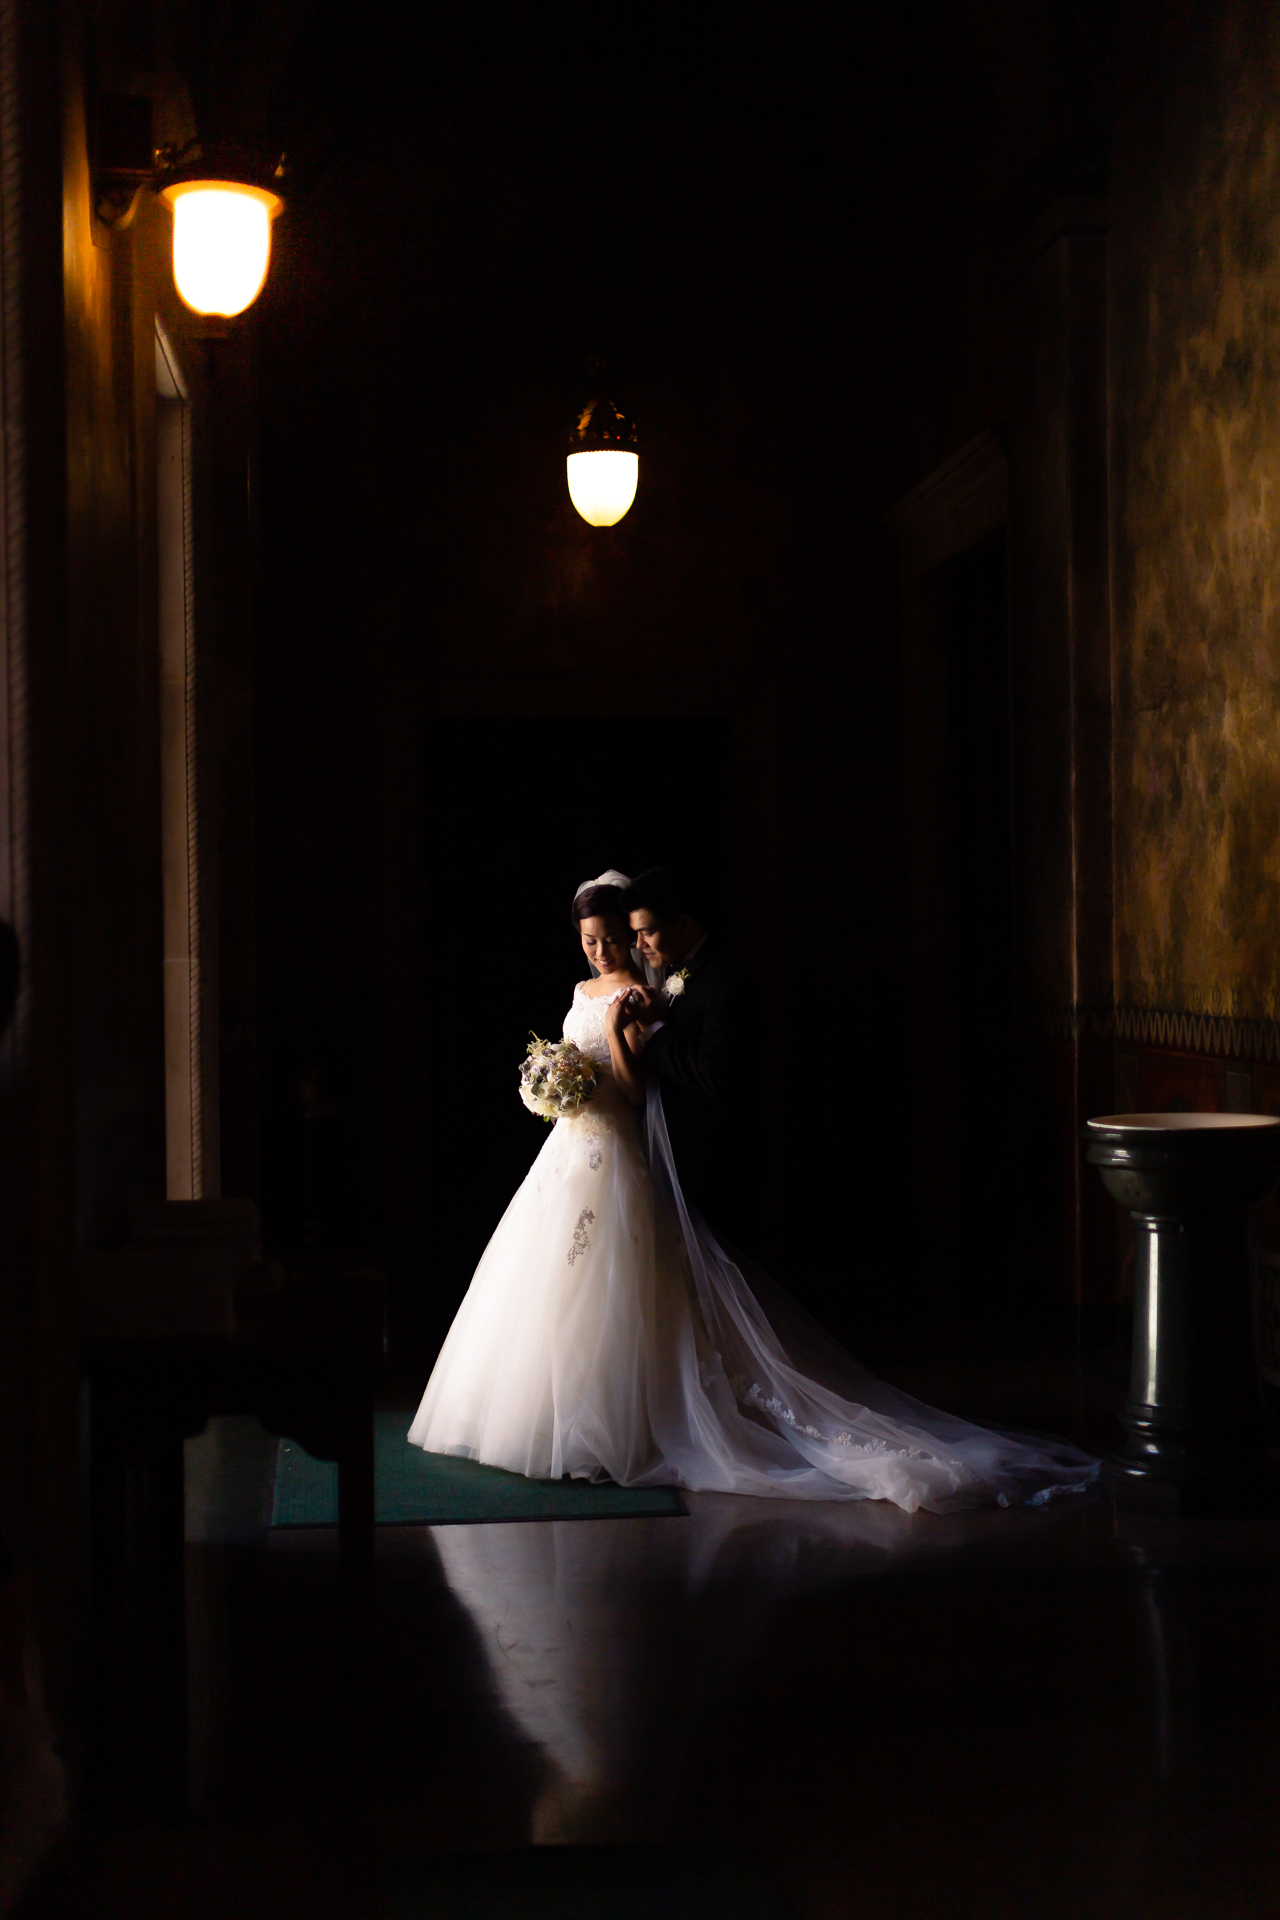 A Wedding photographer capturing Thomas Kim and the bride and groom in a dark hallway.